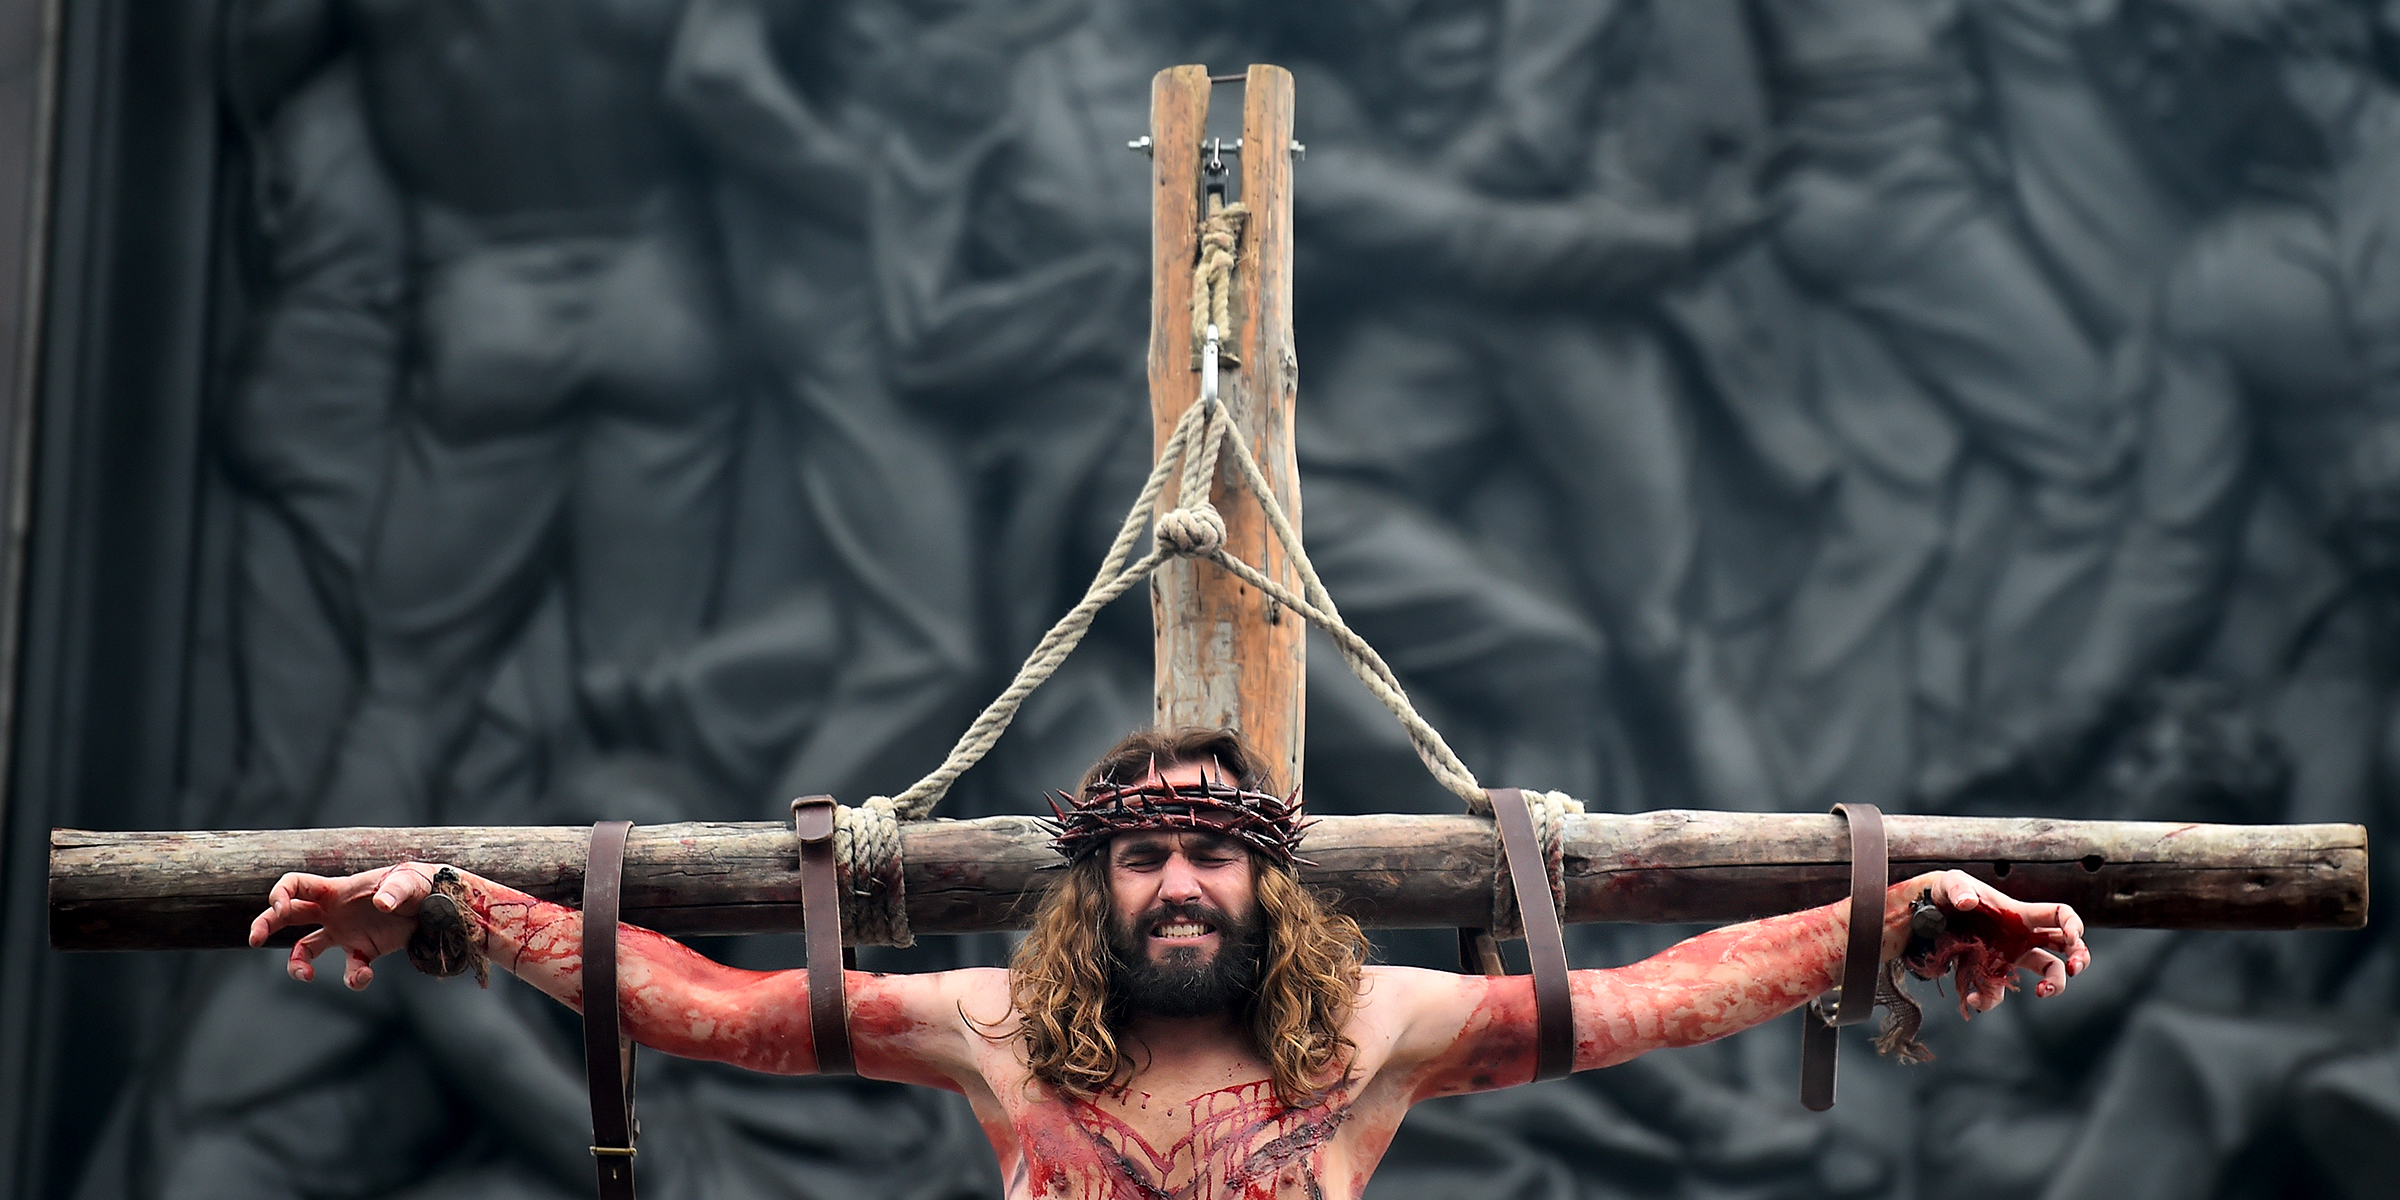 WEB3-PHOTO-OF-THE-DAY-HOLY-WEEK-000_DV1707525-Ben-Stansall-AFP